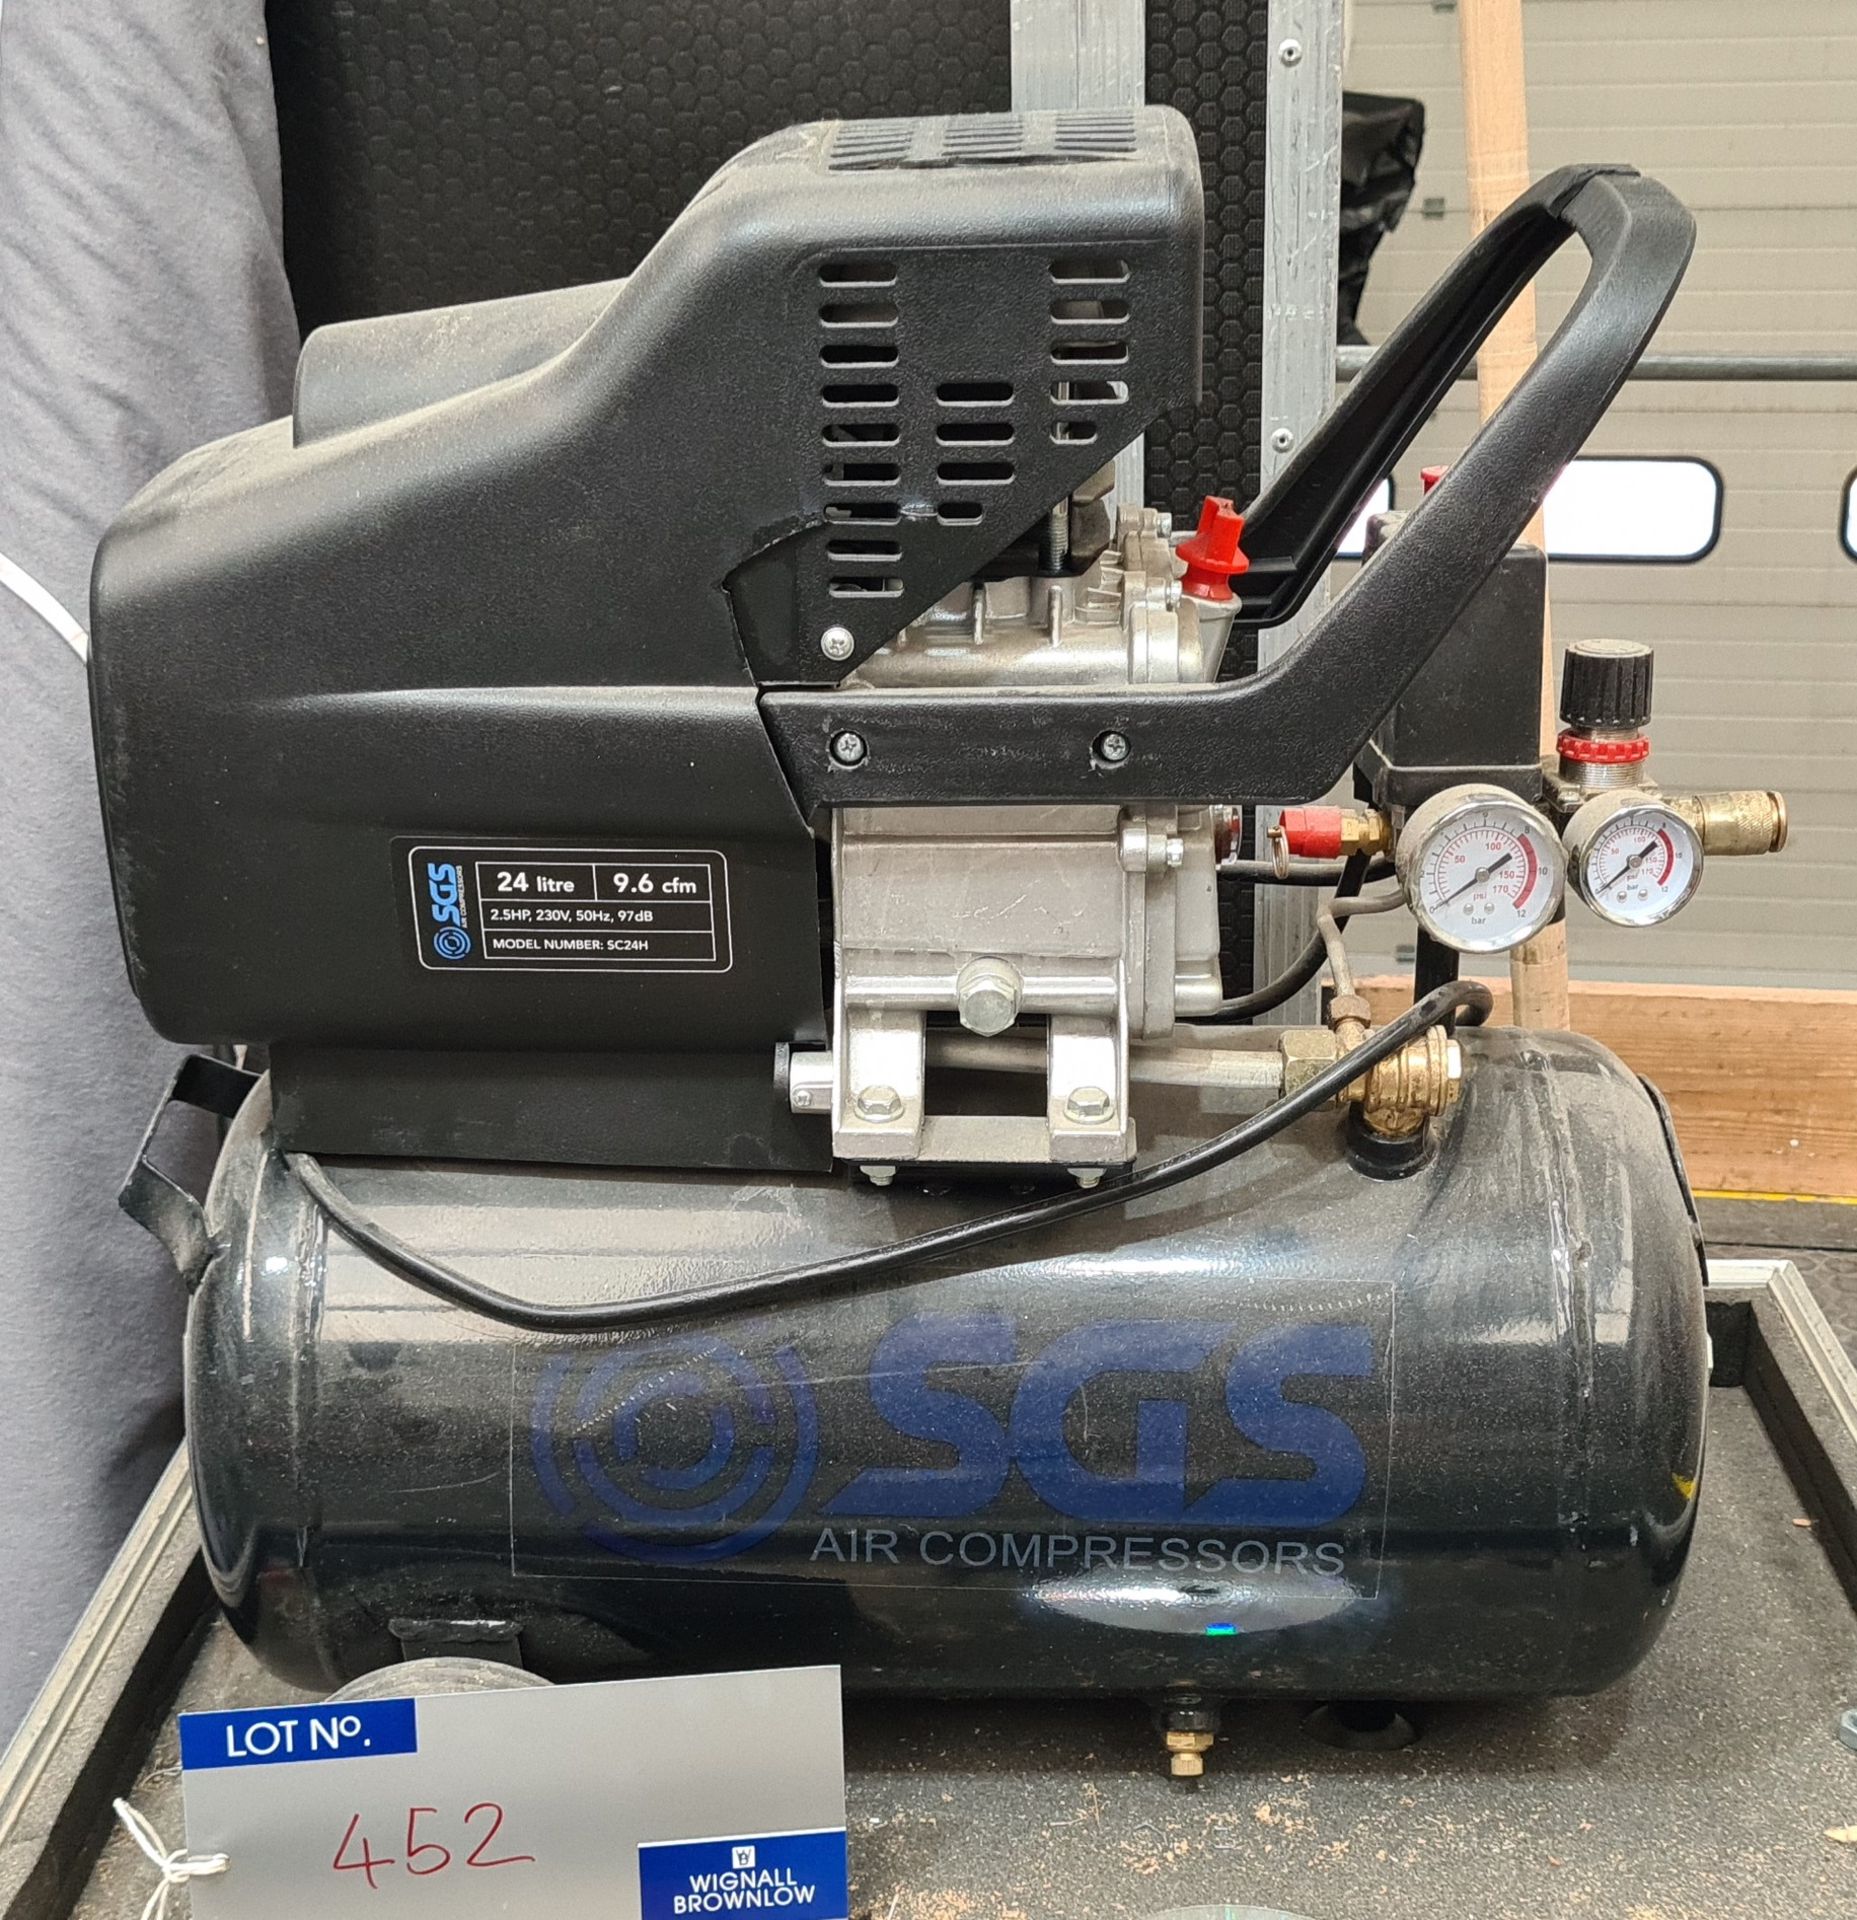 An SGS 24 Litre Direct Drive Portable Air Compressor (damage to plastic handle and body).